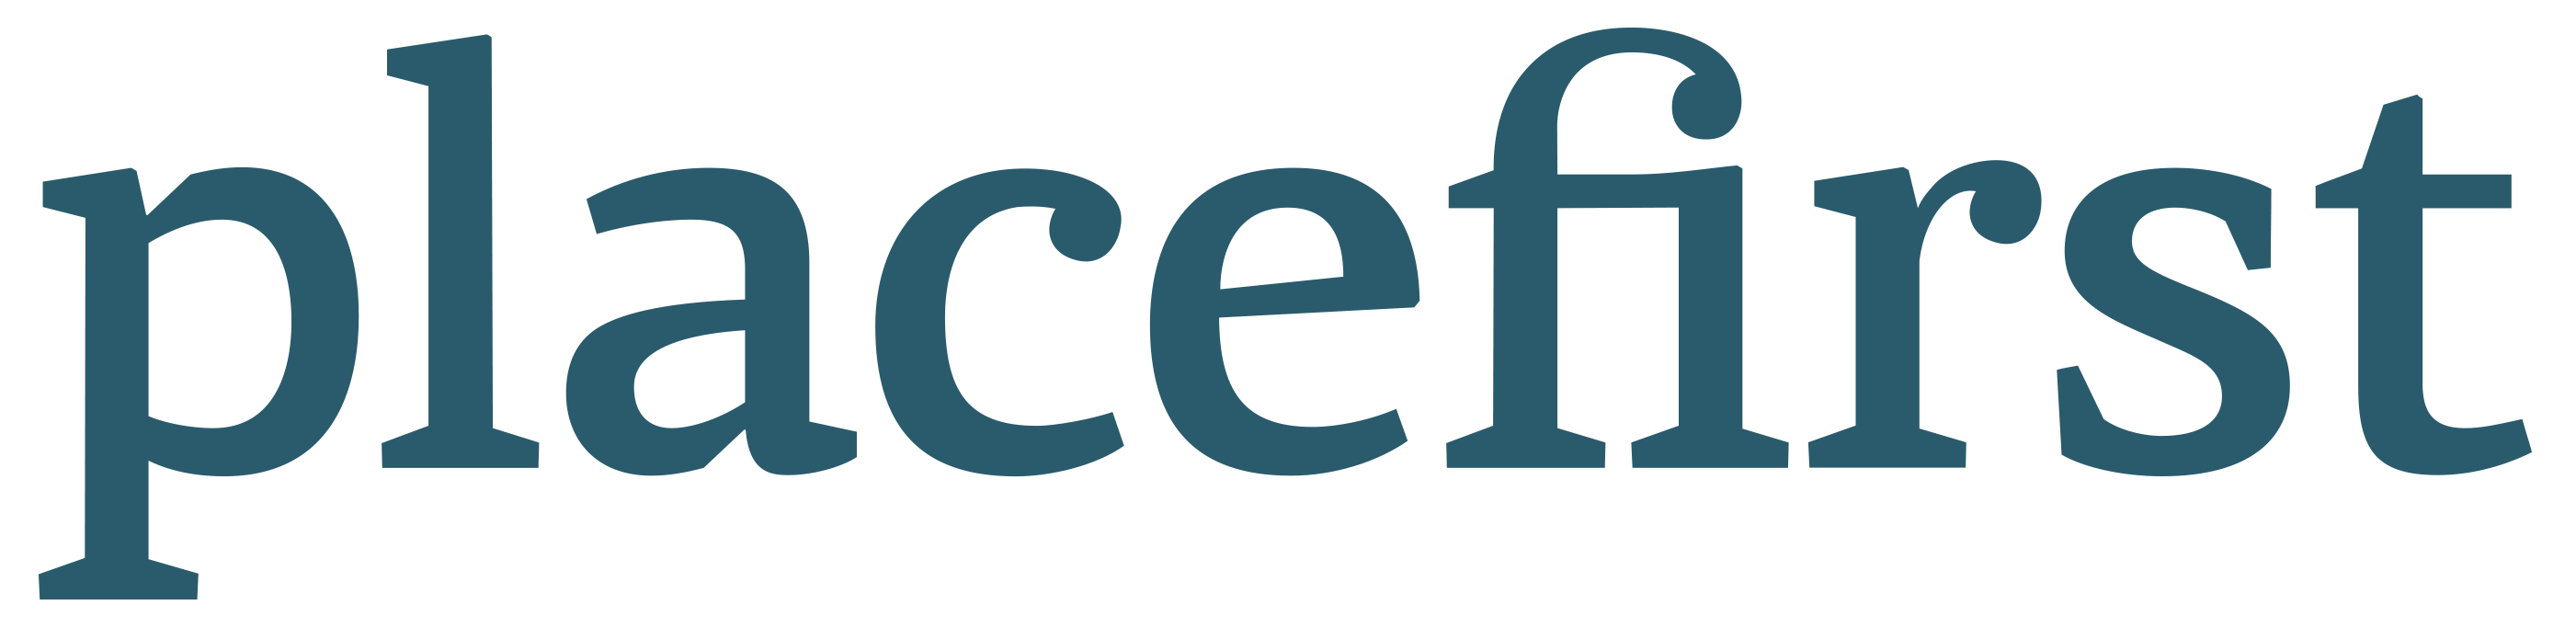 logo for PlaceFirst